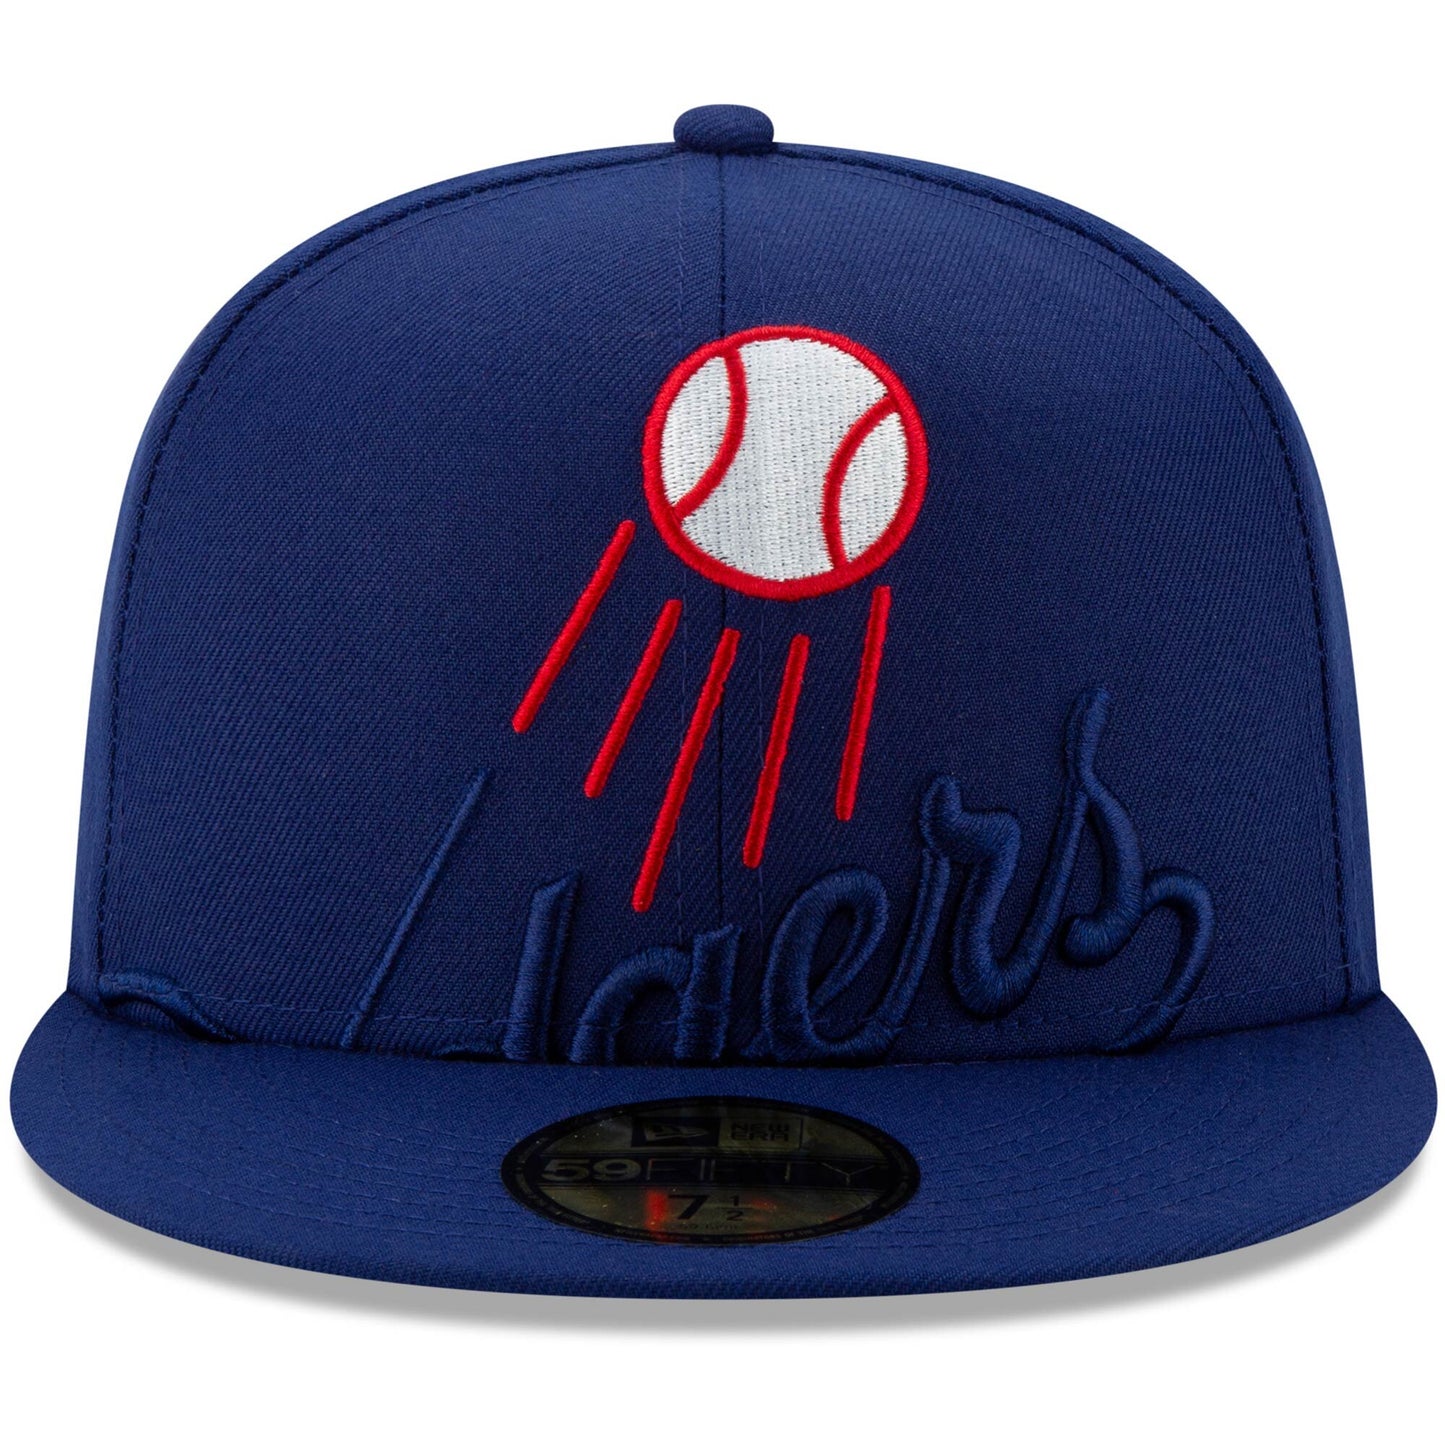 LOS ANGELES DODGERS LOGO ELEMENTS 5950 FITTED